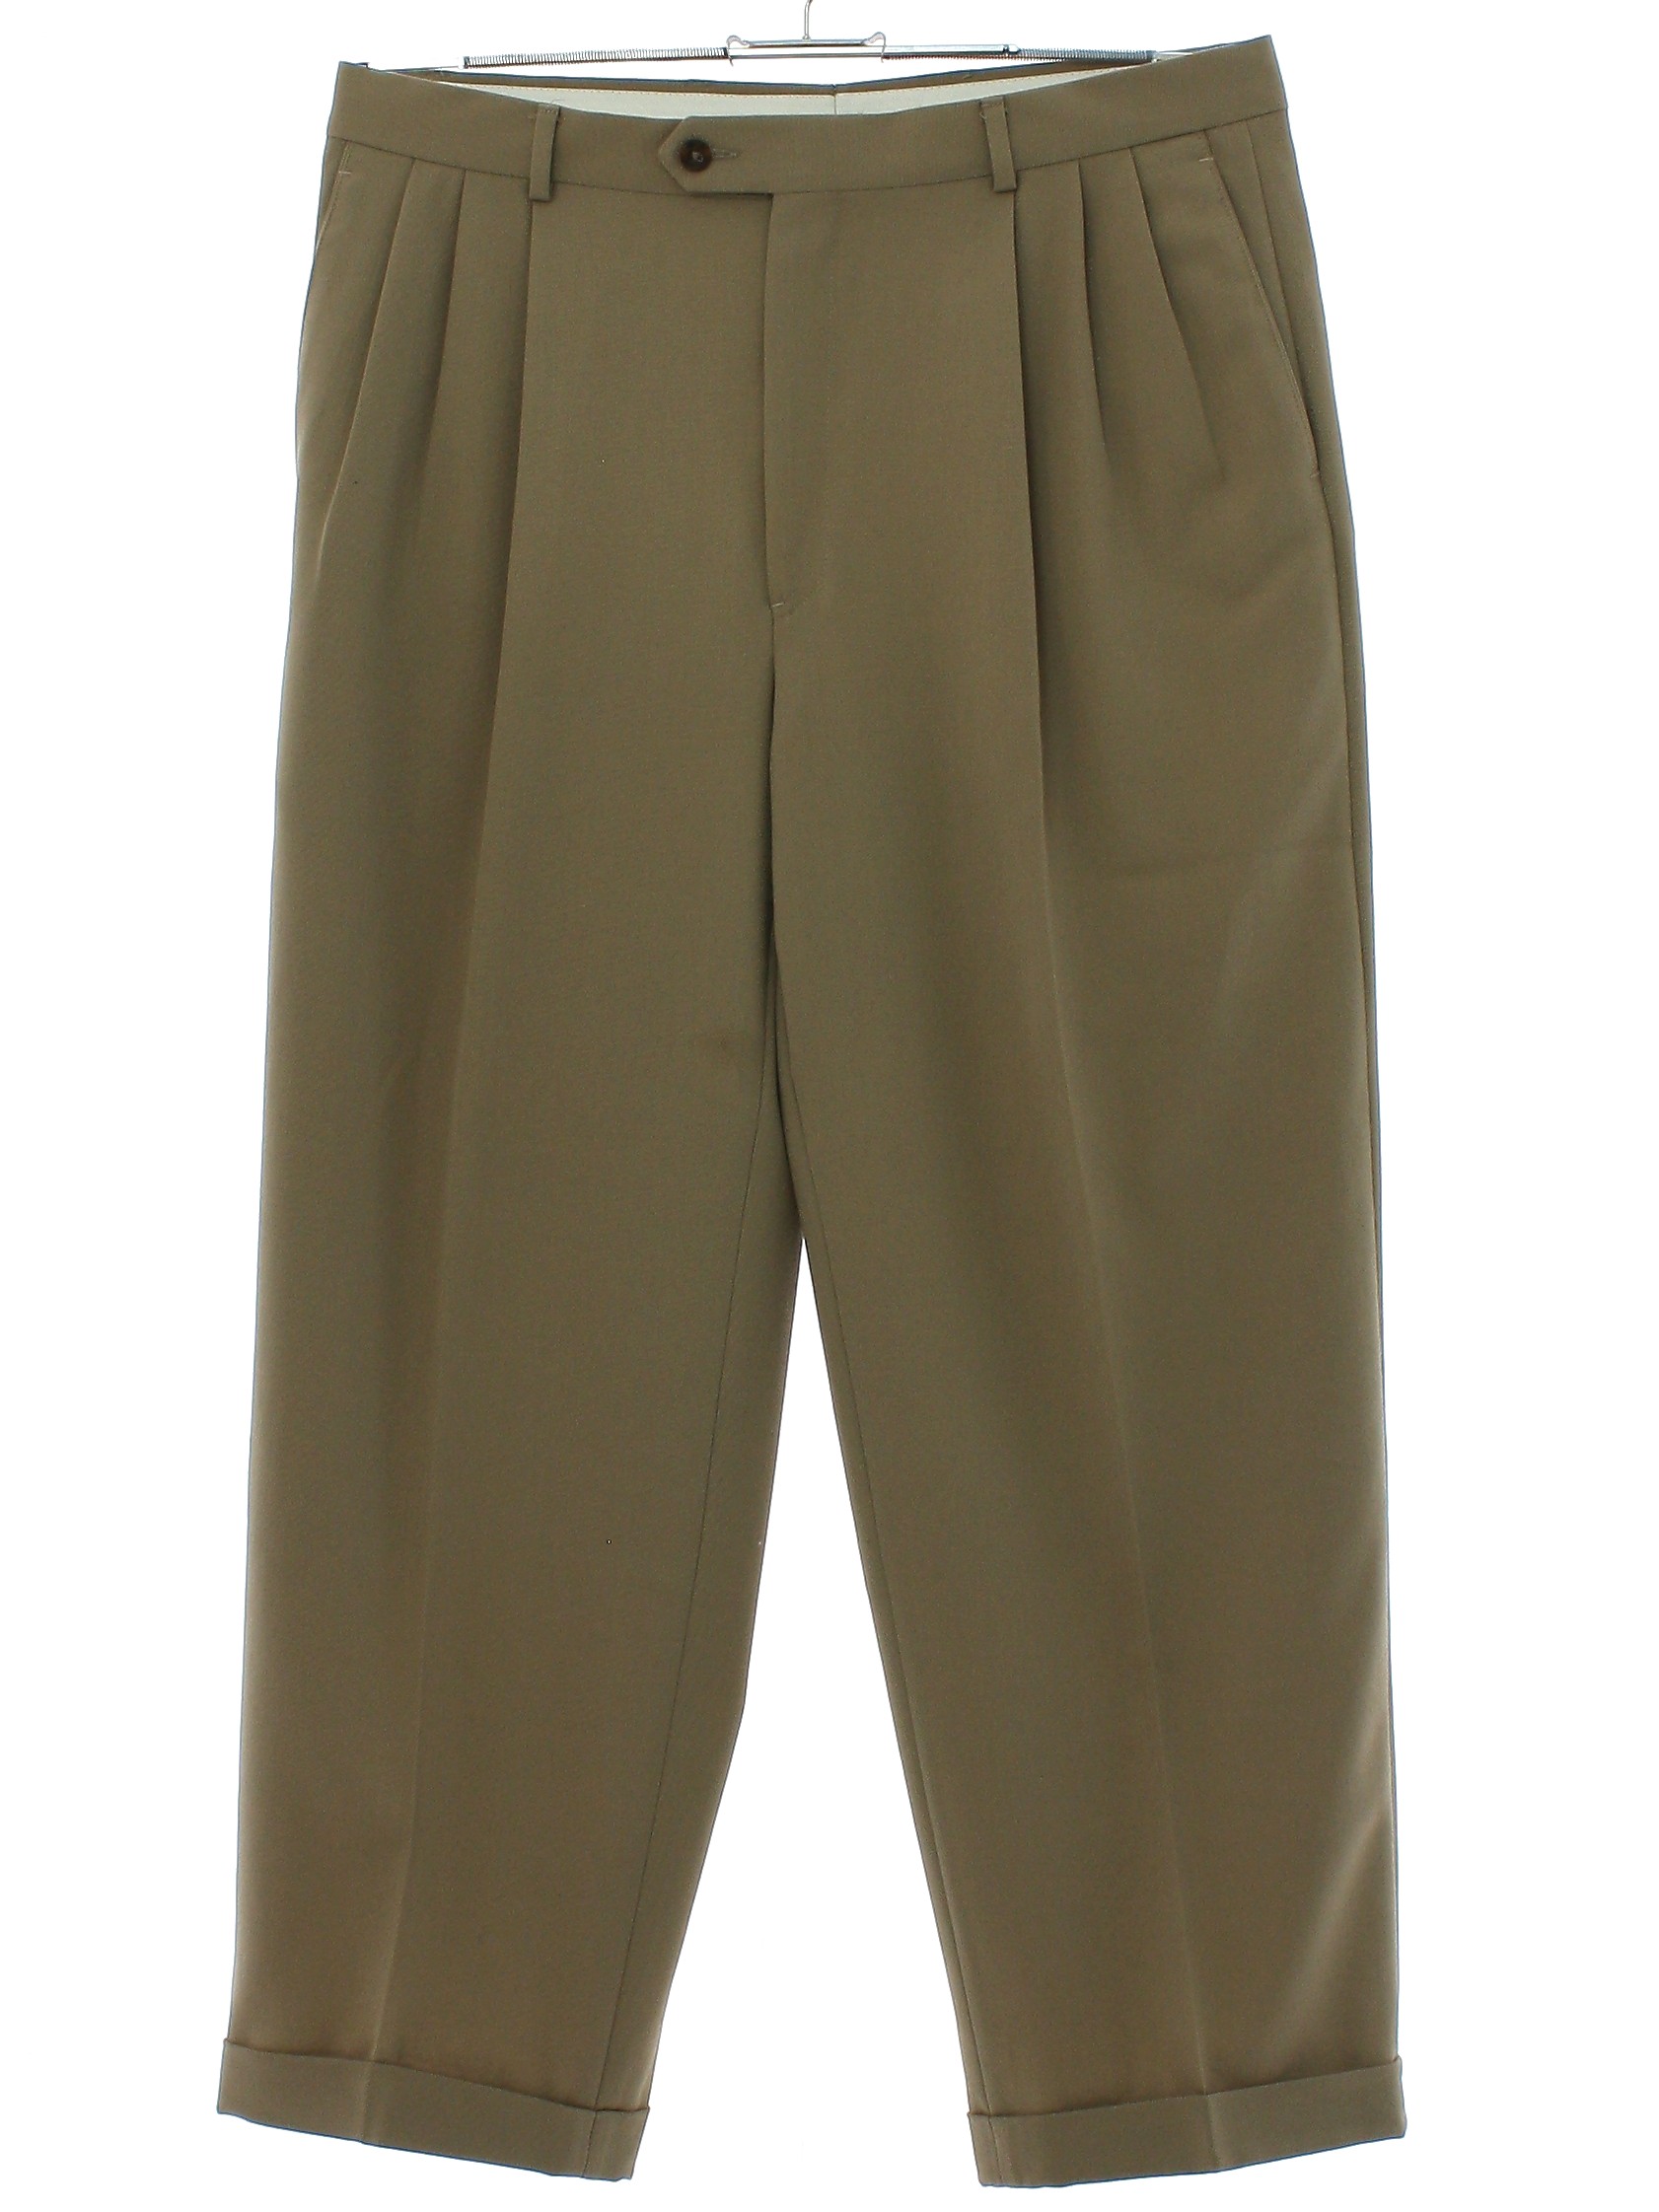 Pants: Late 80s or Early 90s -Pronto Uomo- Mens tan drapey wool ...